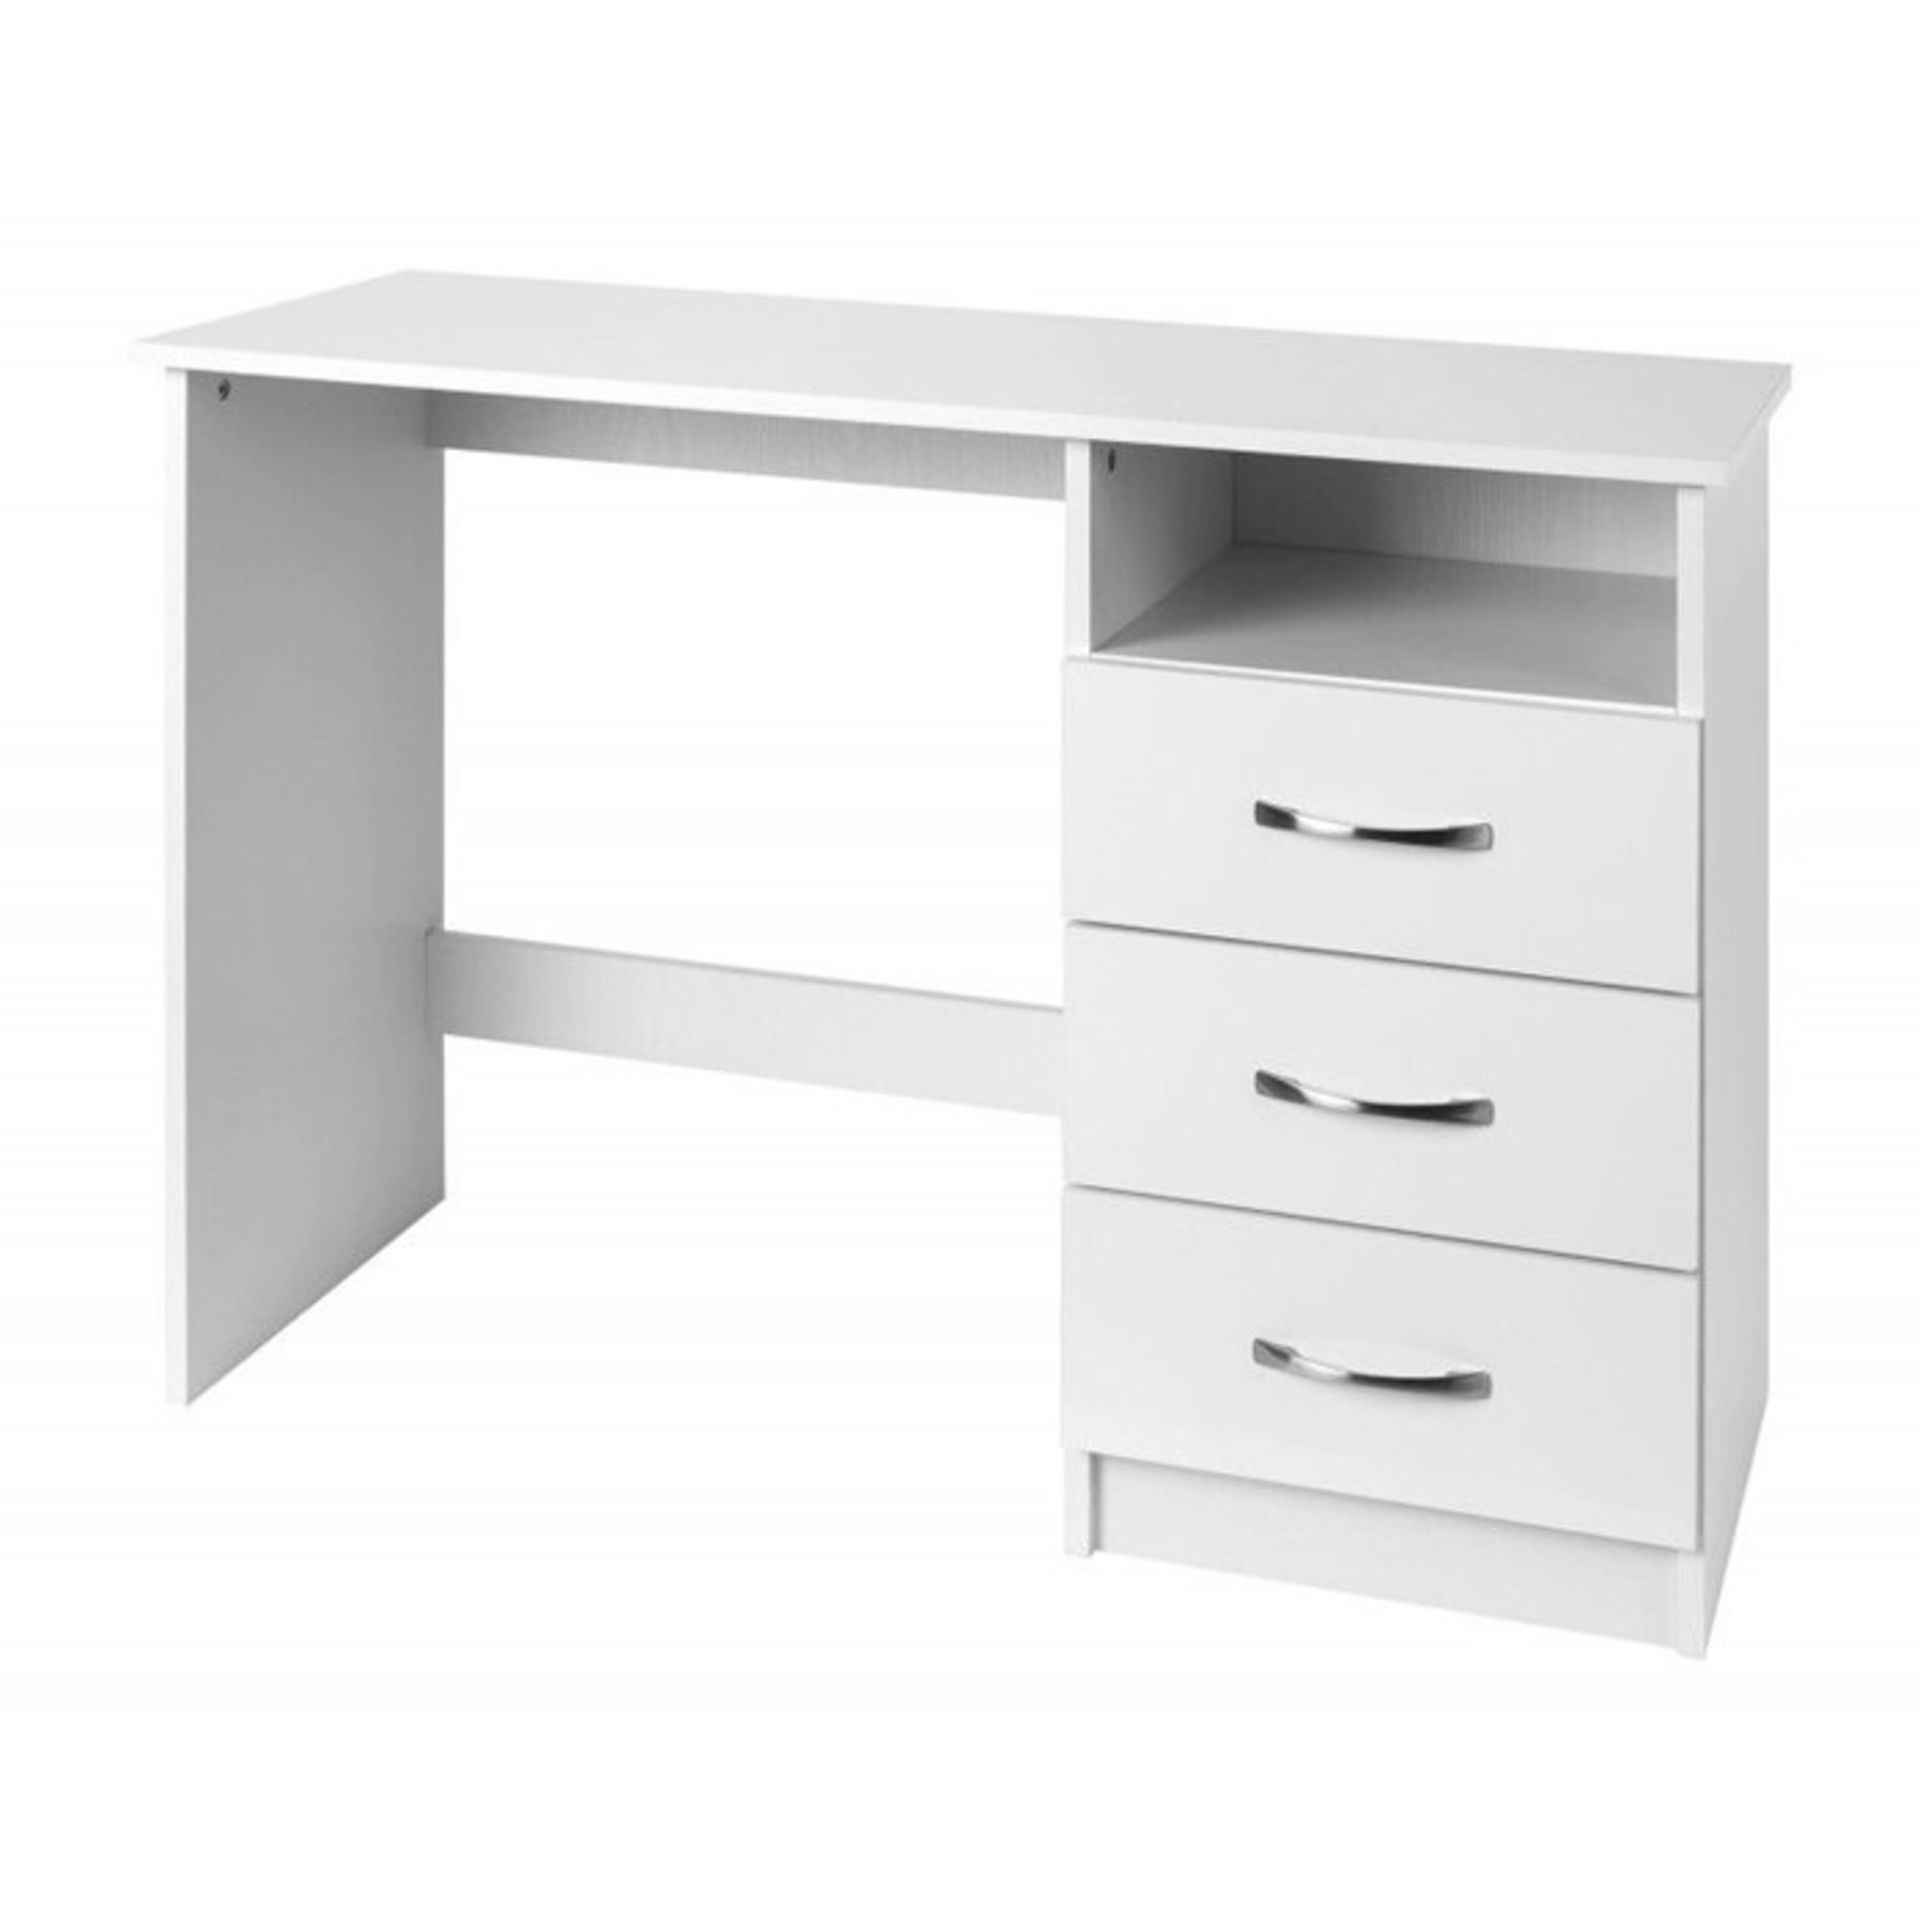 1 LOT TO CONTAIN MARINA DRESSING TABLE DESK IN WHITE GLOSS AND WHITE ASH - BOXED